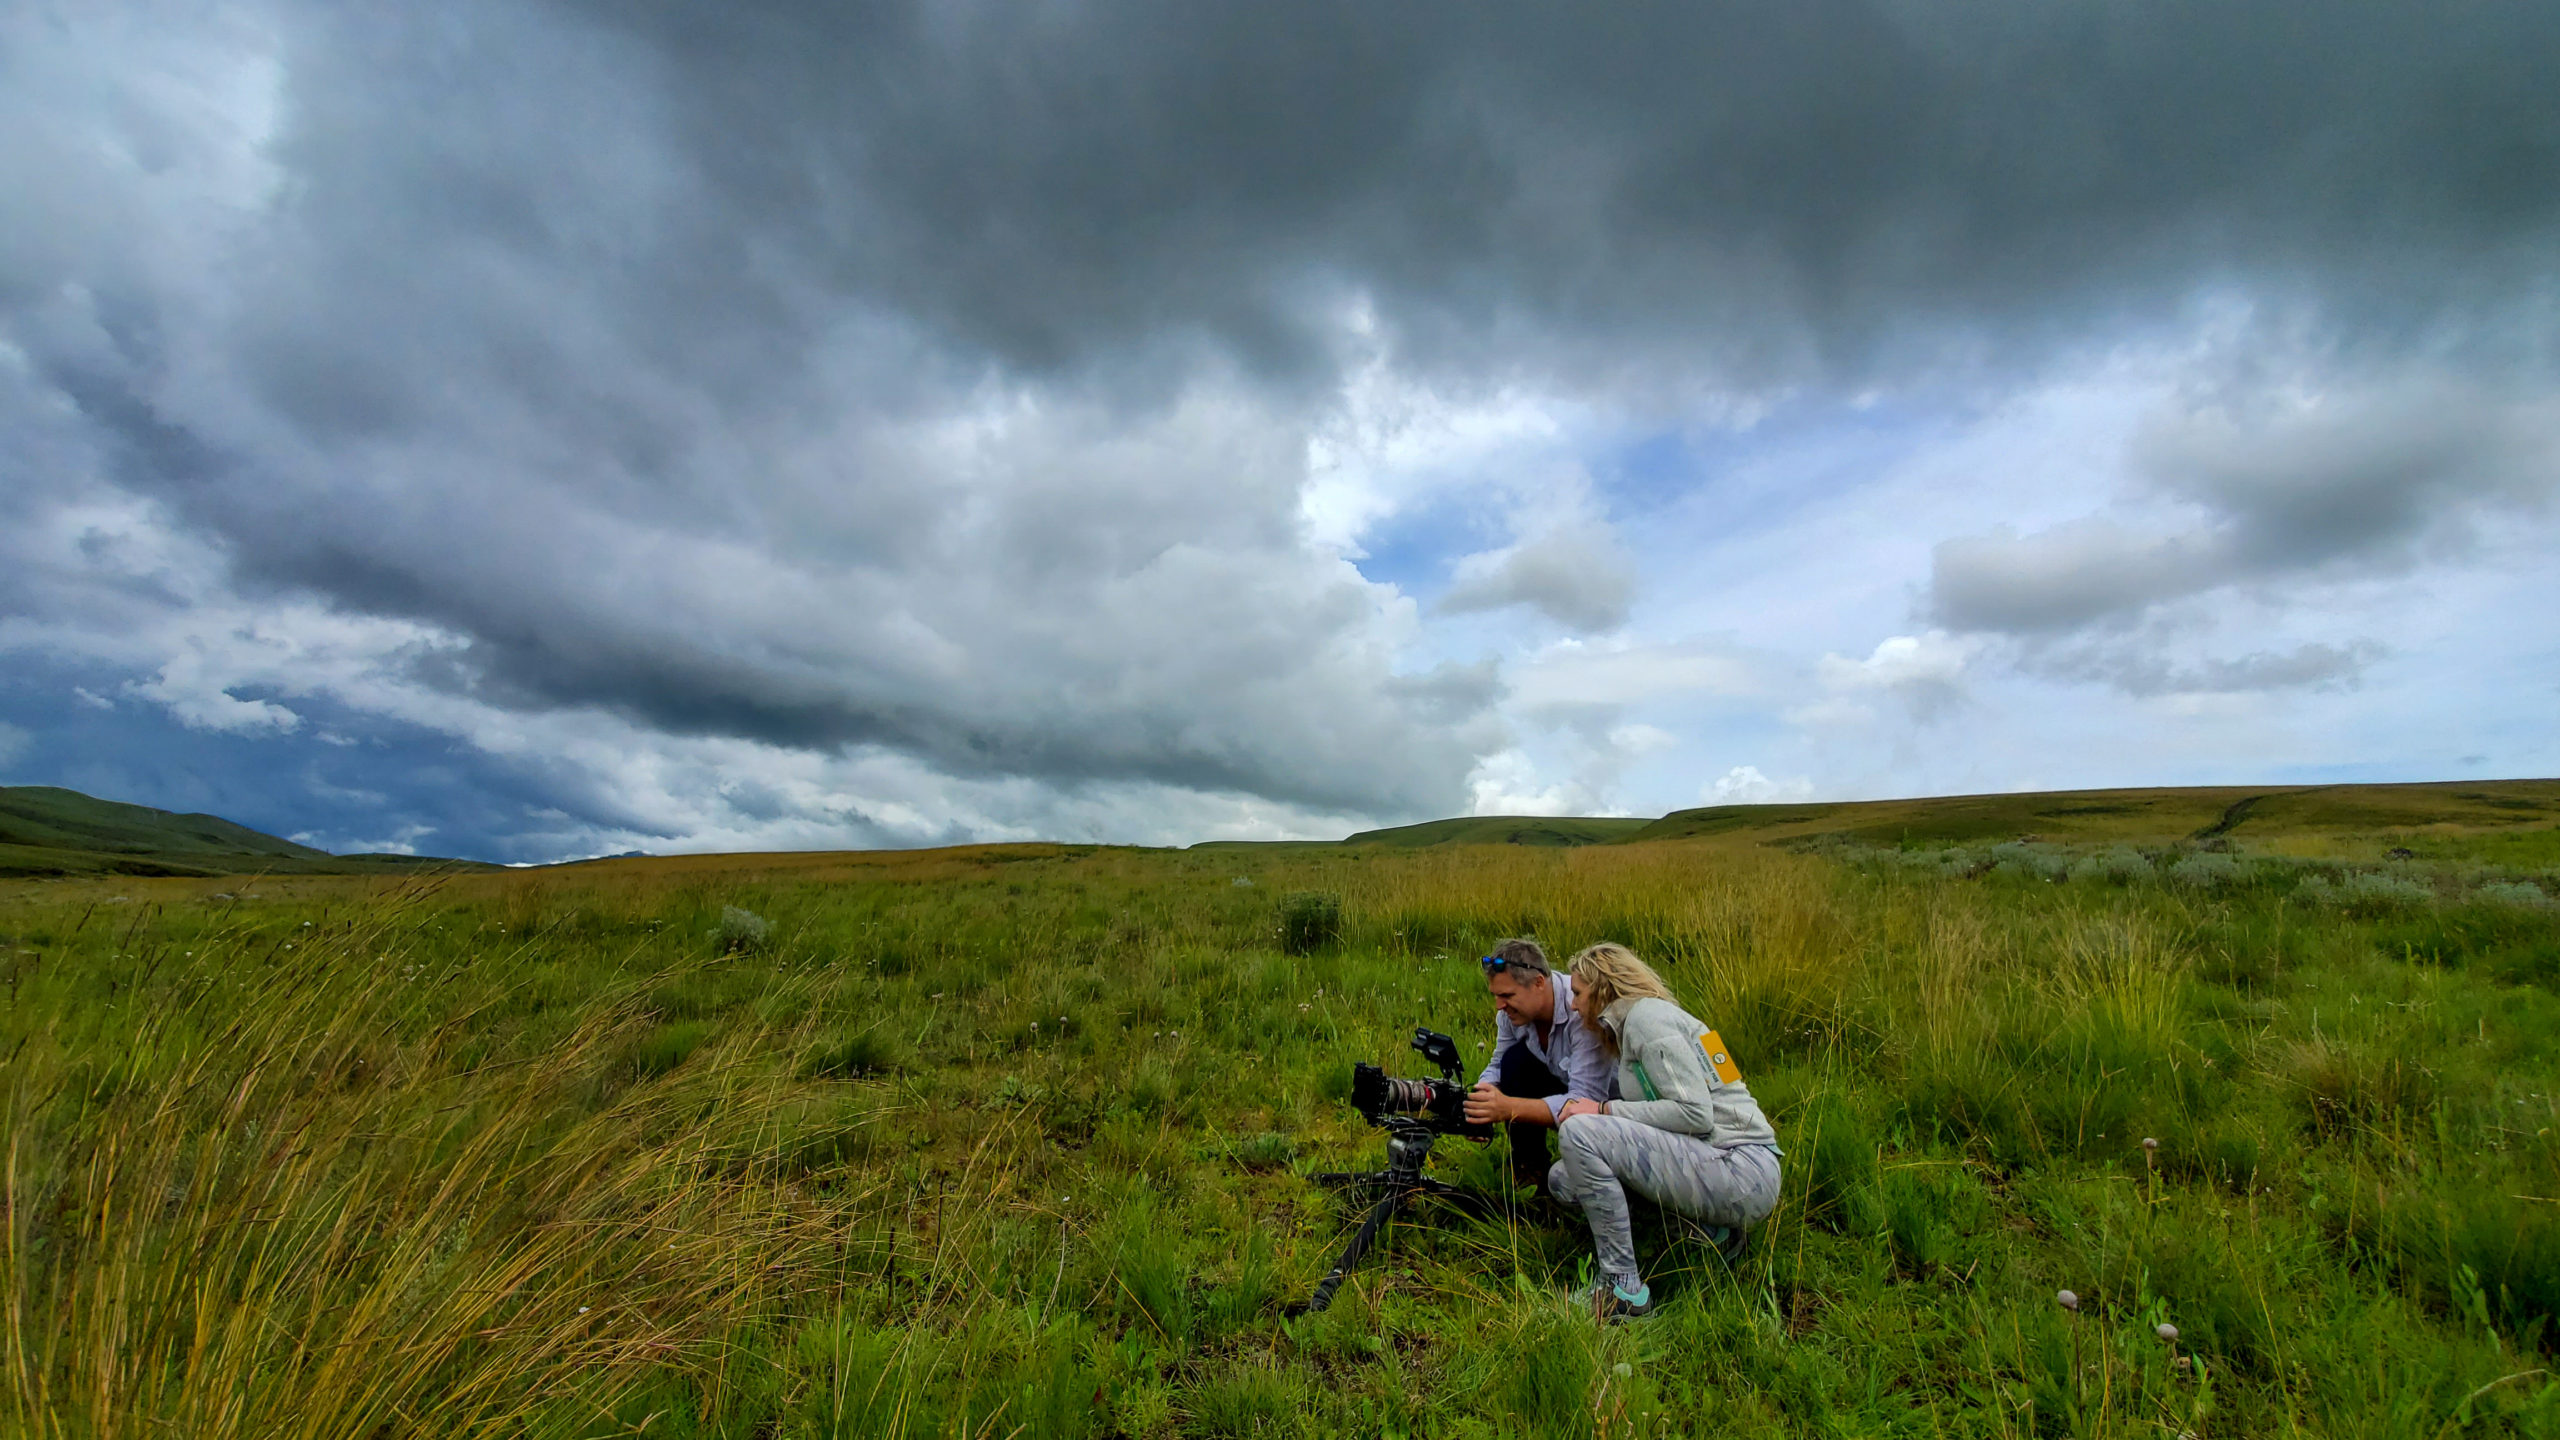 Haley and Wolfie iin a field of wildflowers filming in Tanzania